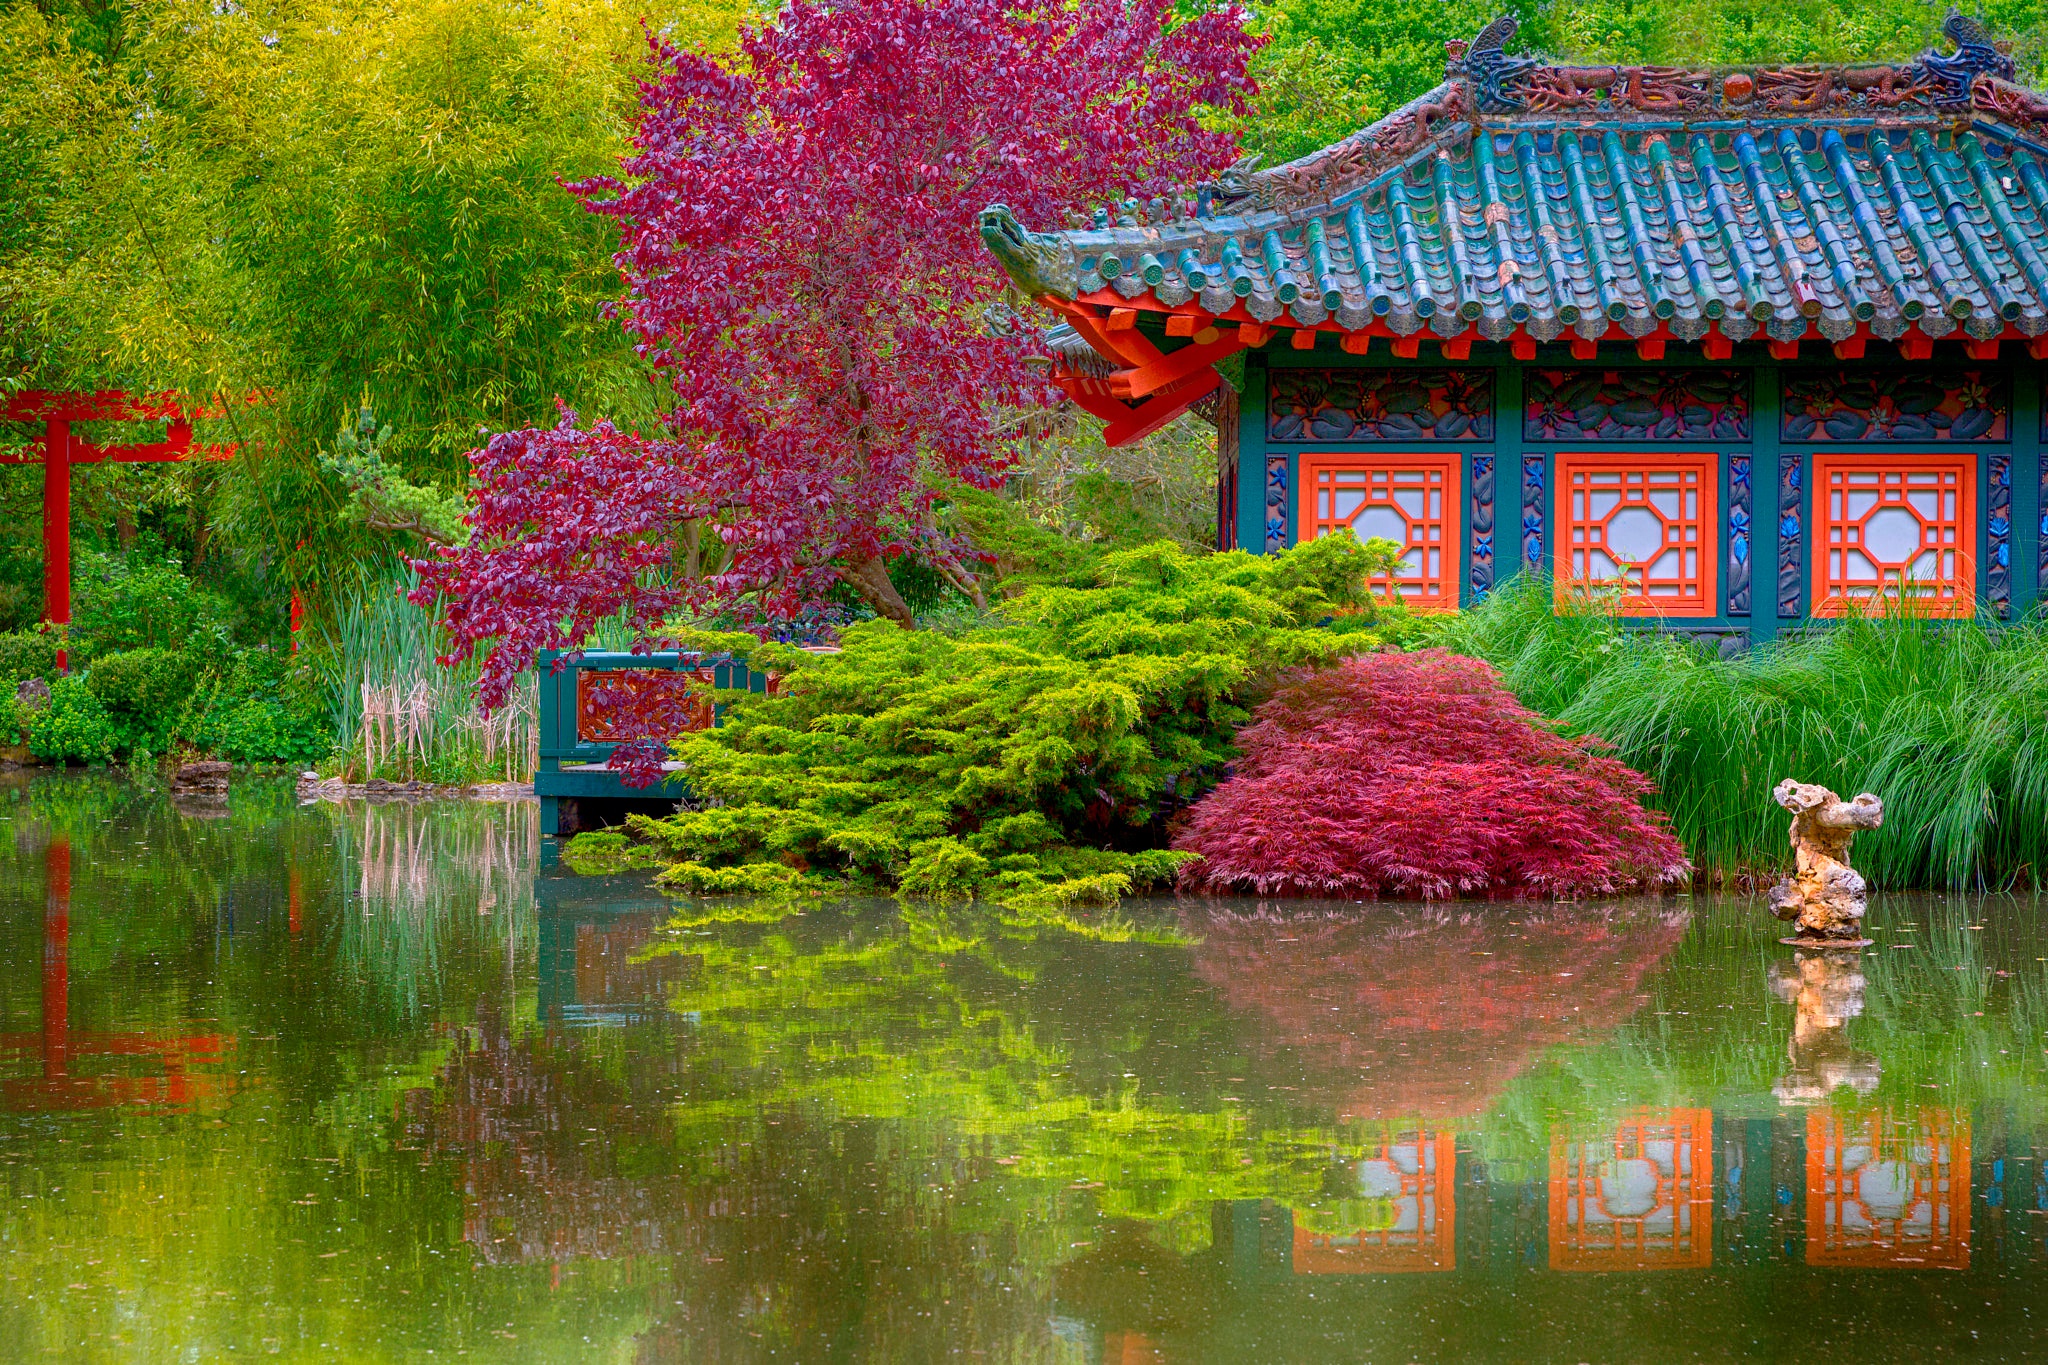 man made, japanese garden, colorful, lodge, pond, tree cellphone